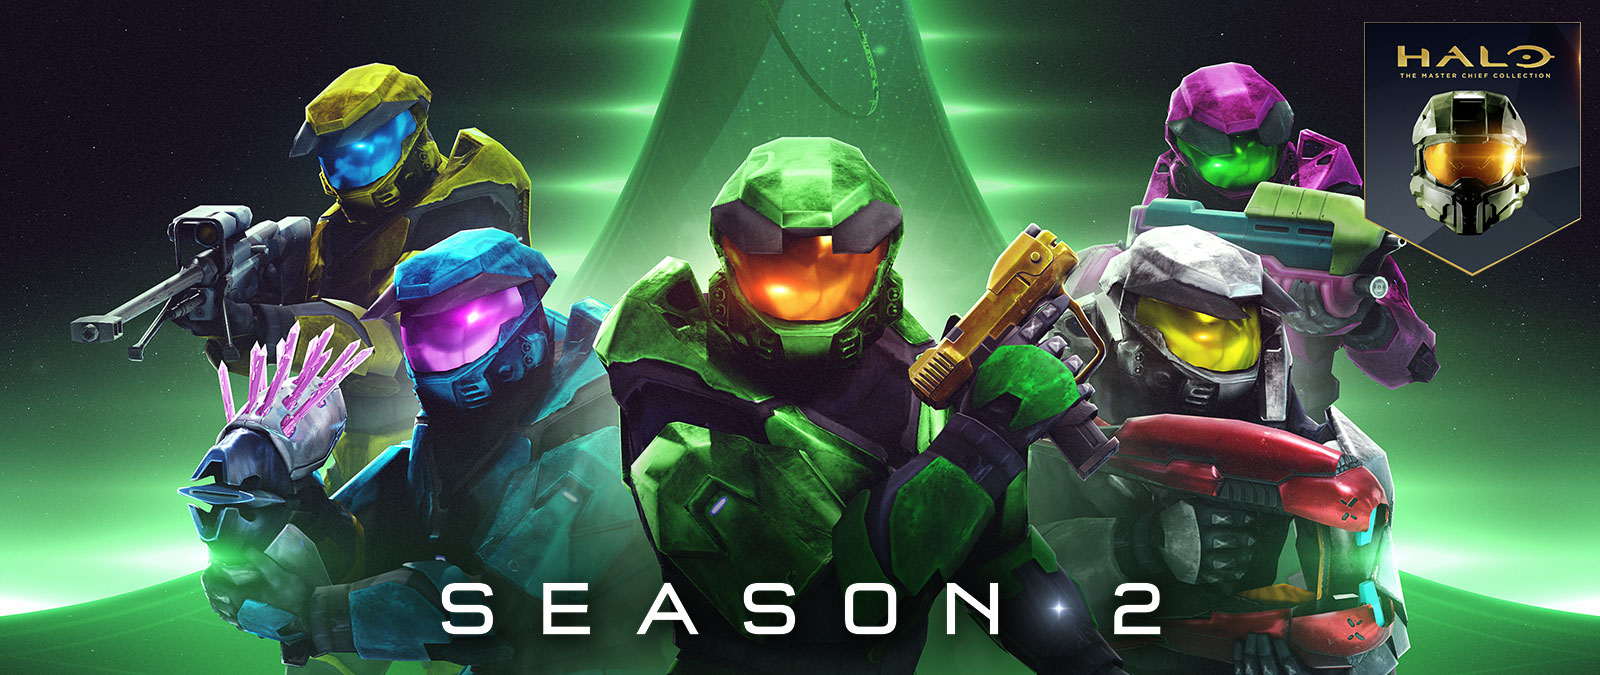 Halo: The Master Chief Collection, Season 2, 5 Spartans from Halo Combat Evolved hold colourful weapons like the needler and pistol